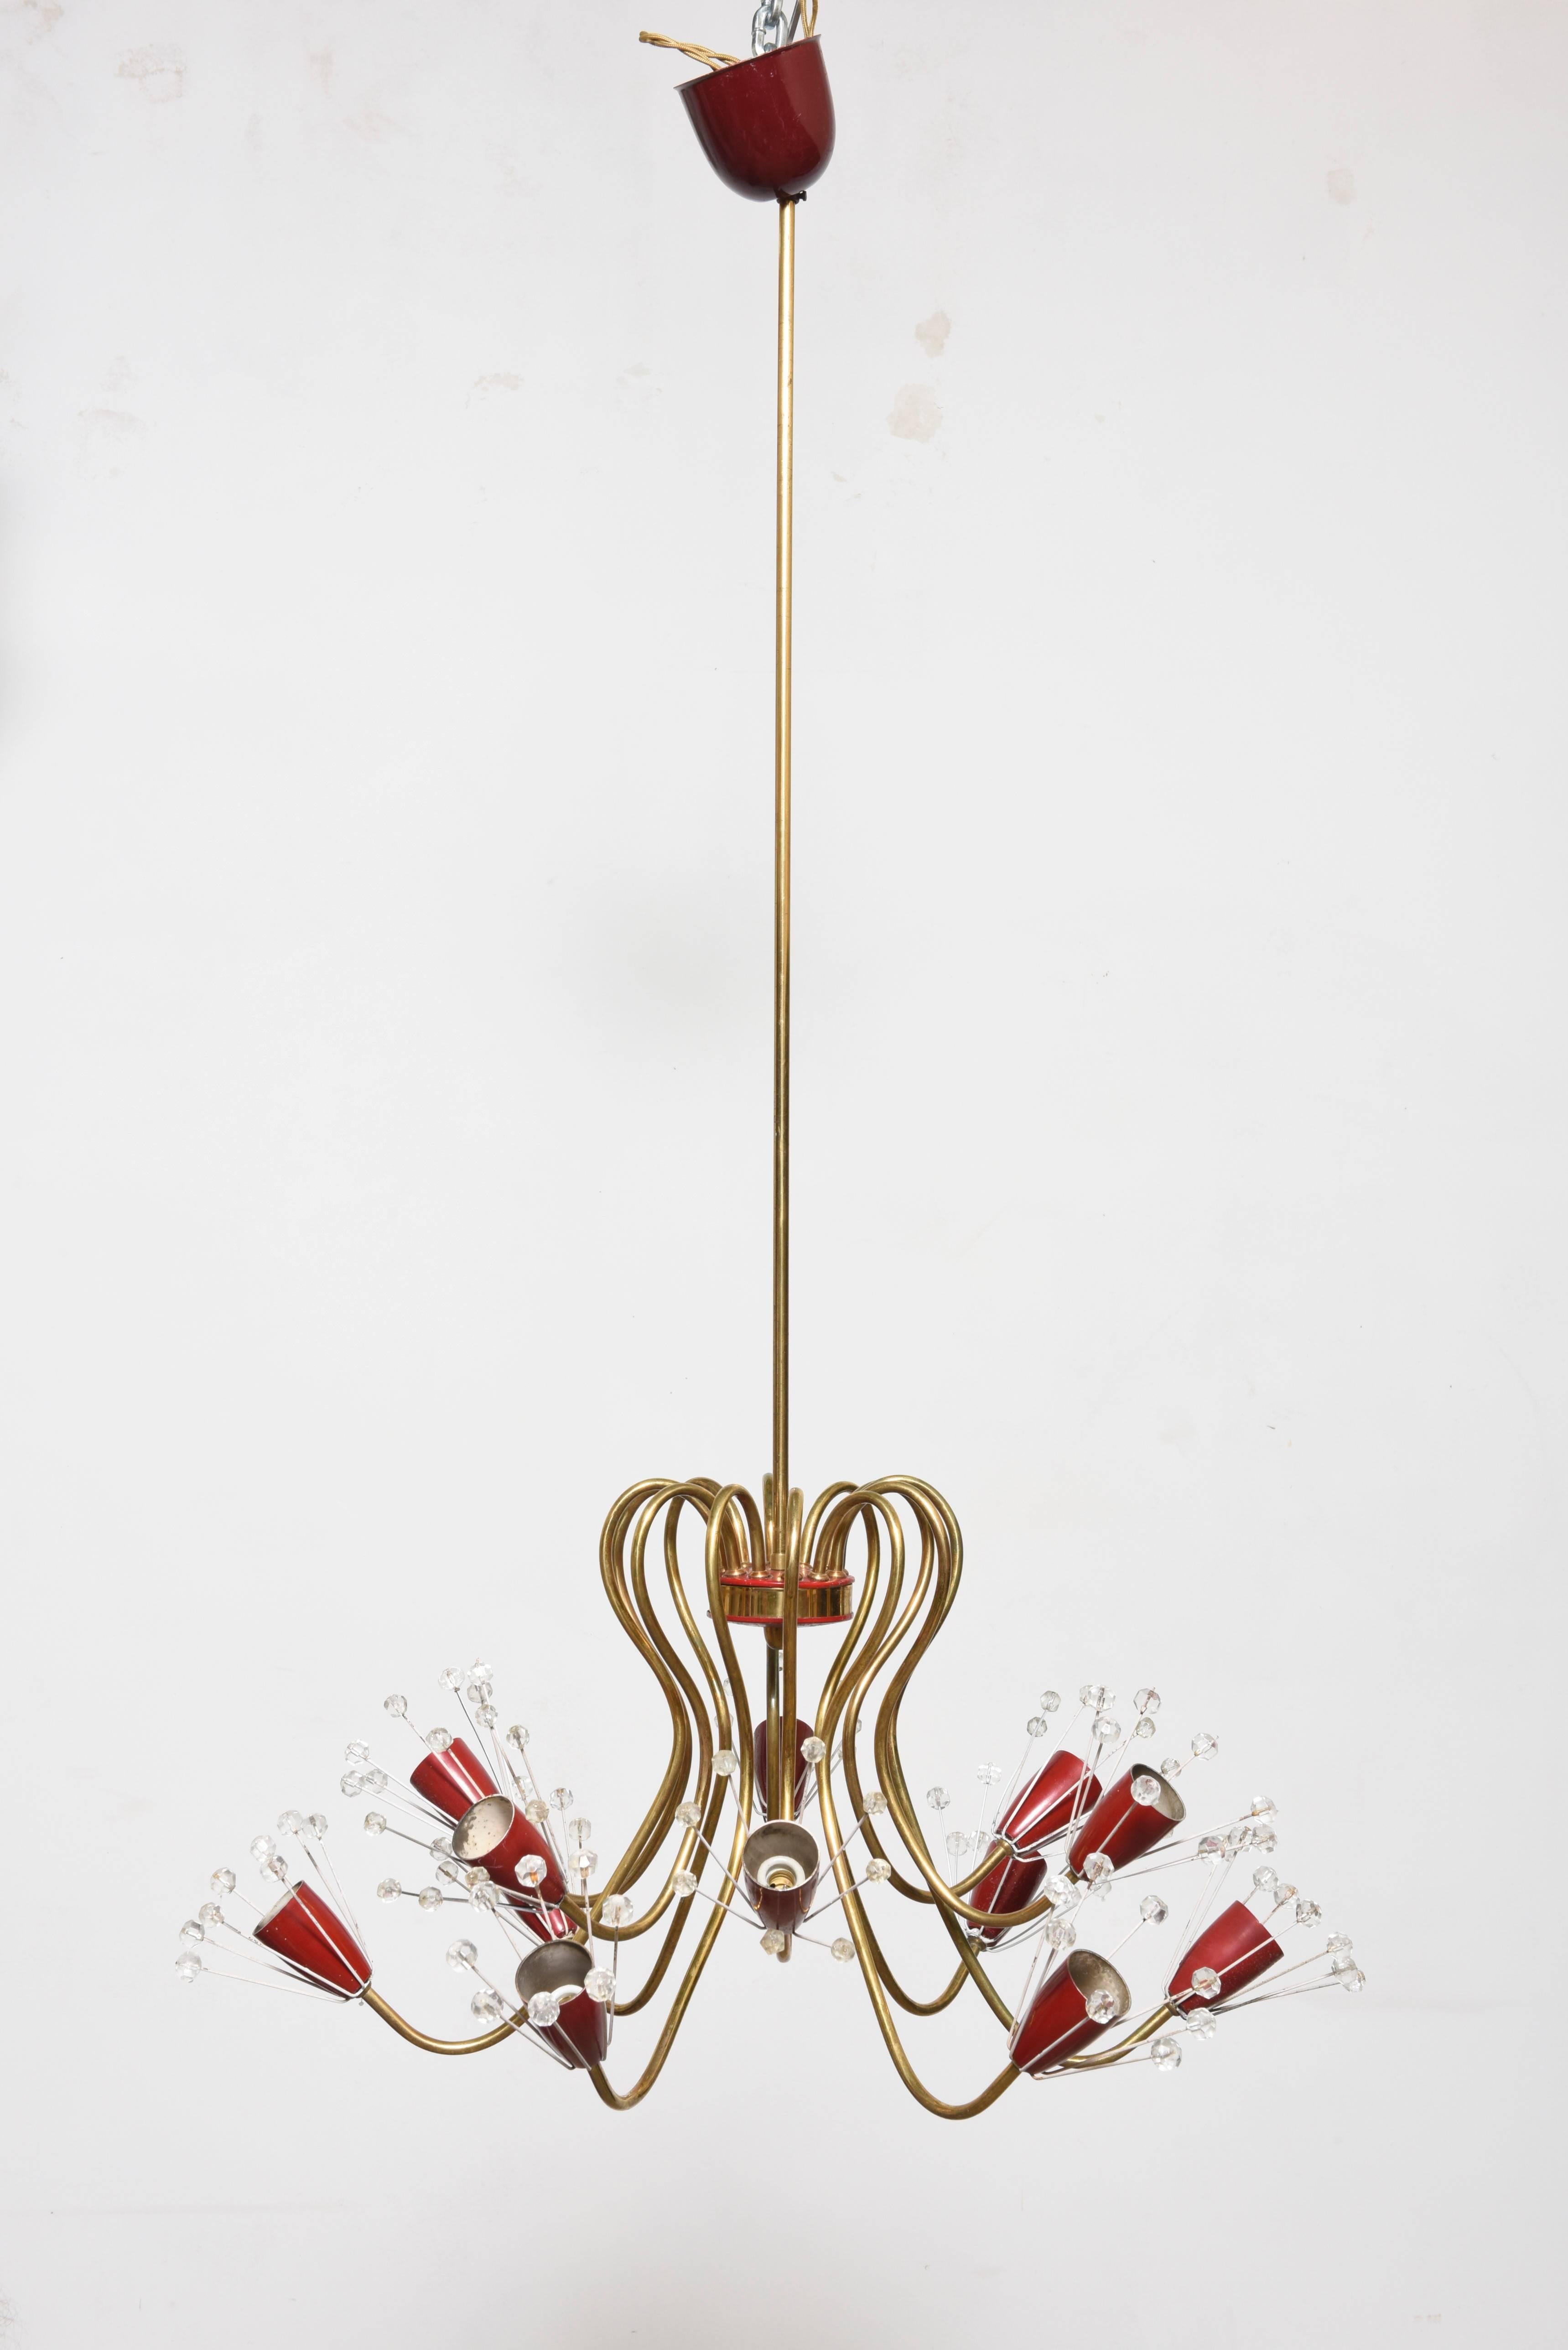 Original early Viennese chandelier by Emil Stejnar for Rupert Nikoll from the 1950s. Made of brass, red lacquered metal and hand cut crystals. Excellent condition. It takes twelve small base bulbs up to 40W each.